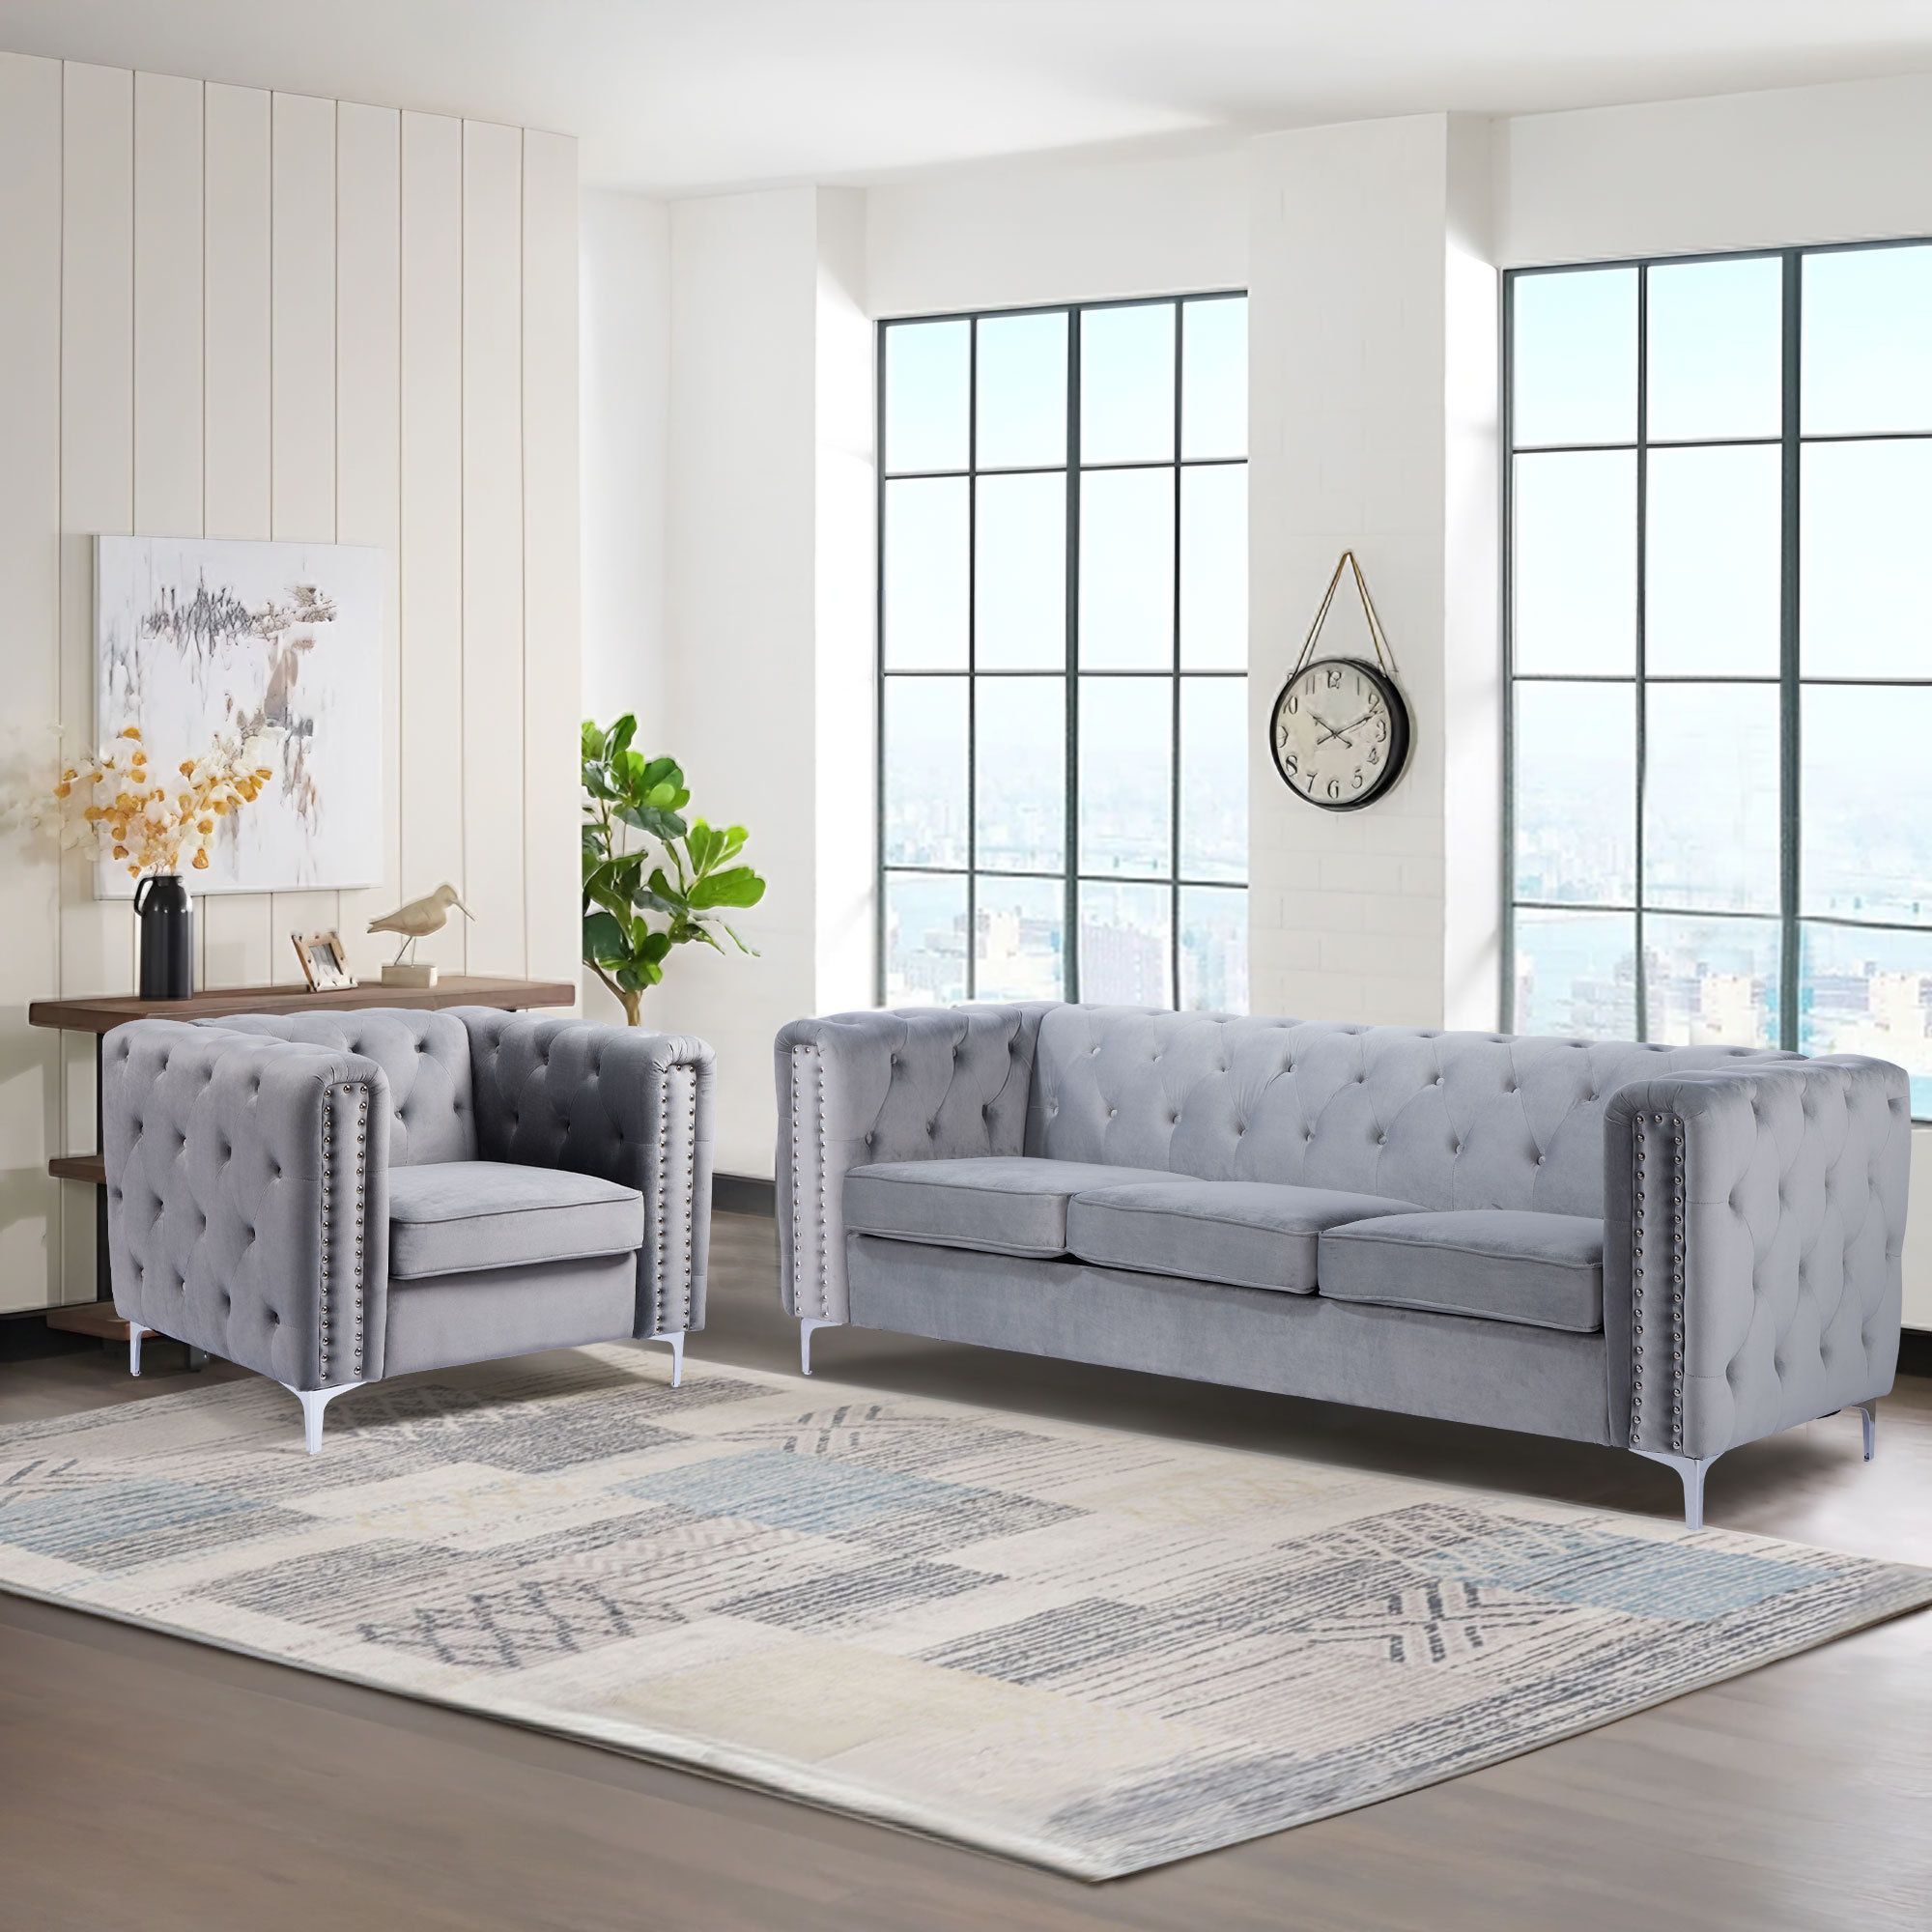 Bonzy Home Modern 2 Pieces Soft Upholstered Tufted Living Room Sofa Sets |  Wayfair Within Tufted Upholstered Sofas (Photo 2 of 15)